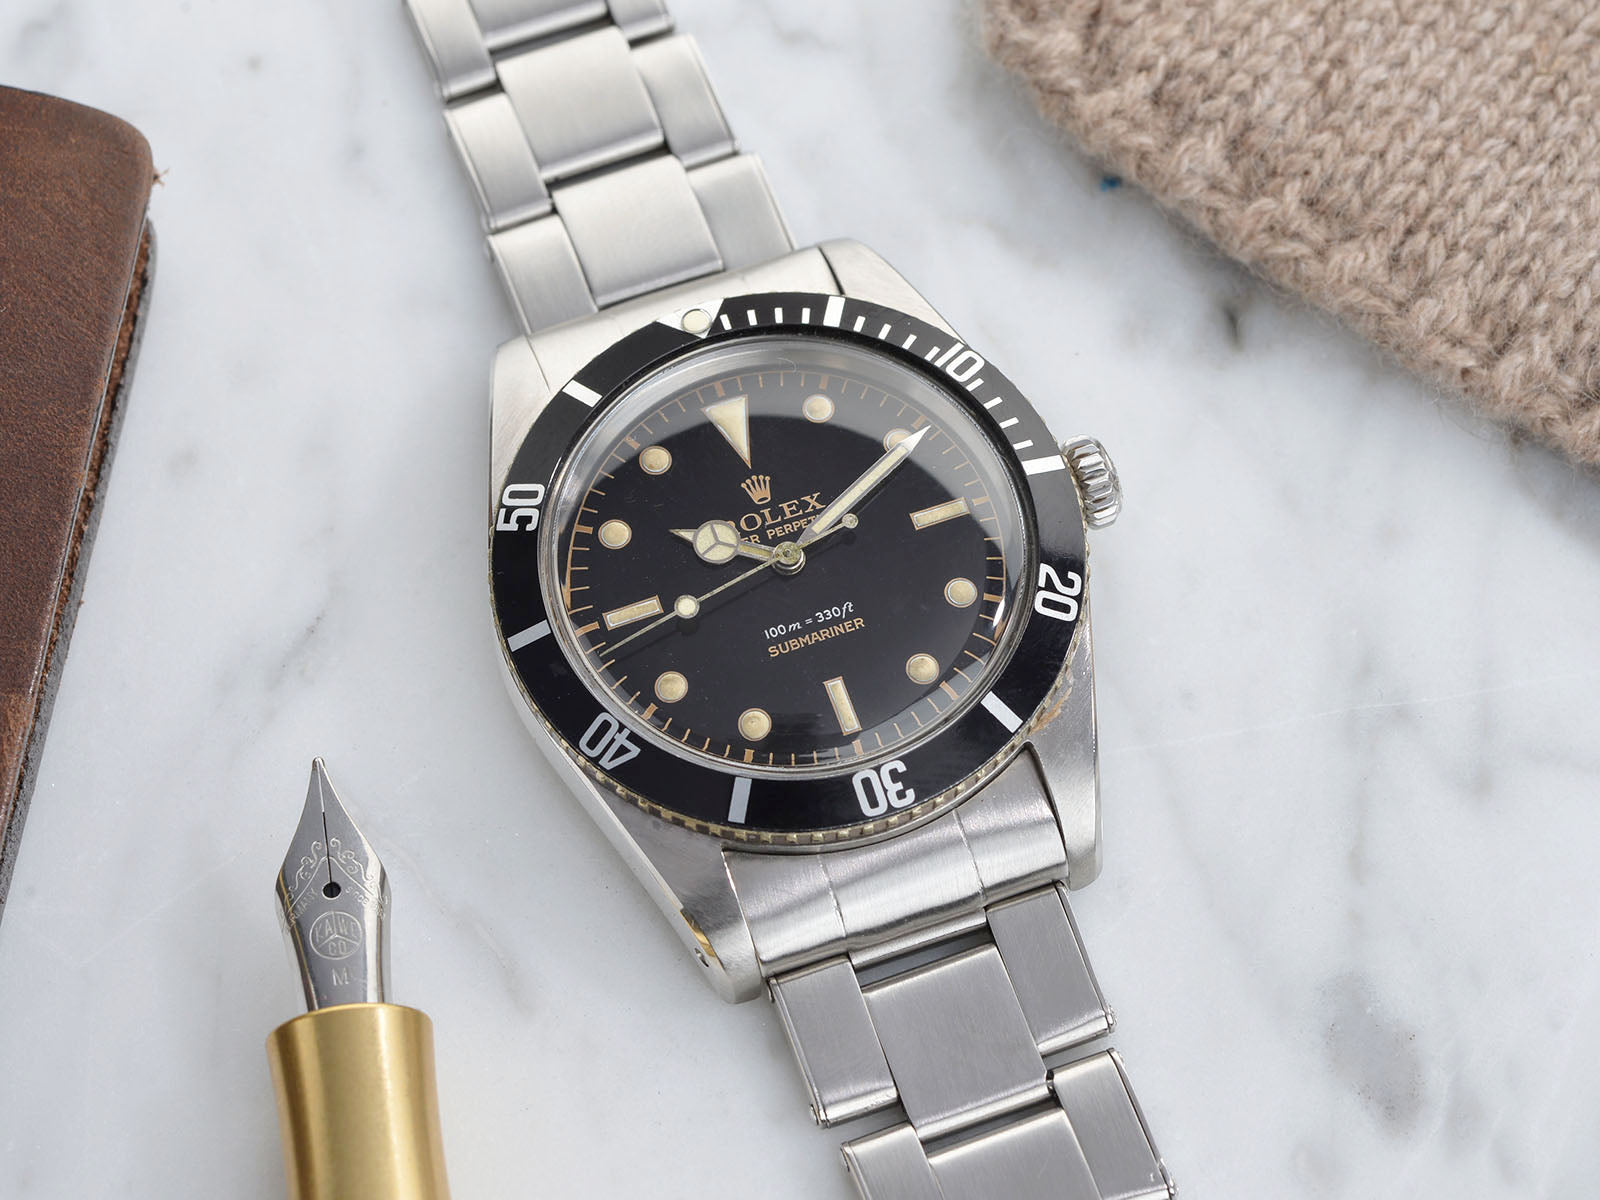 The Rolex Submariner Reference 5508  